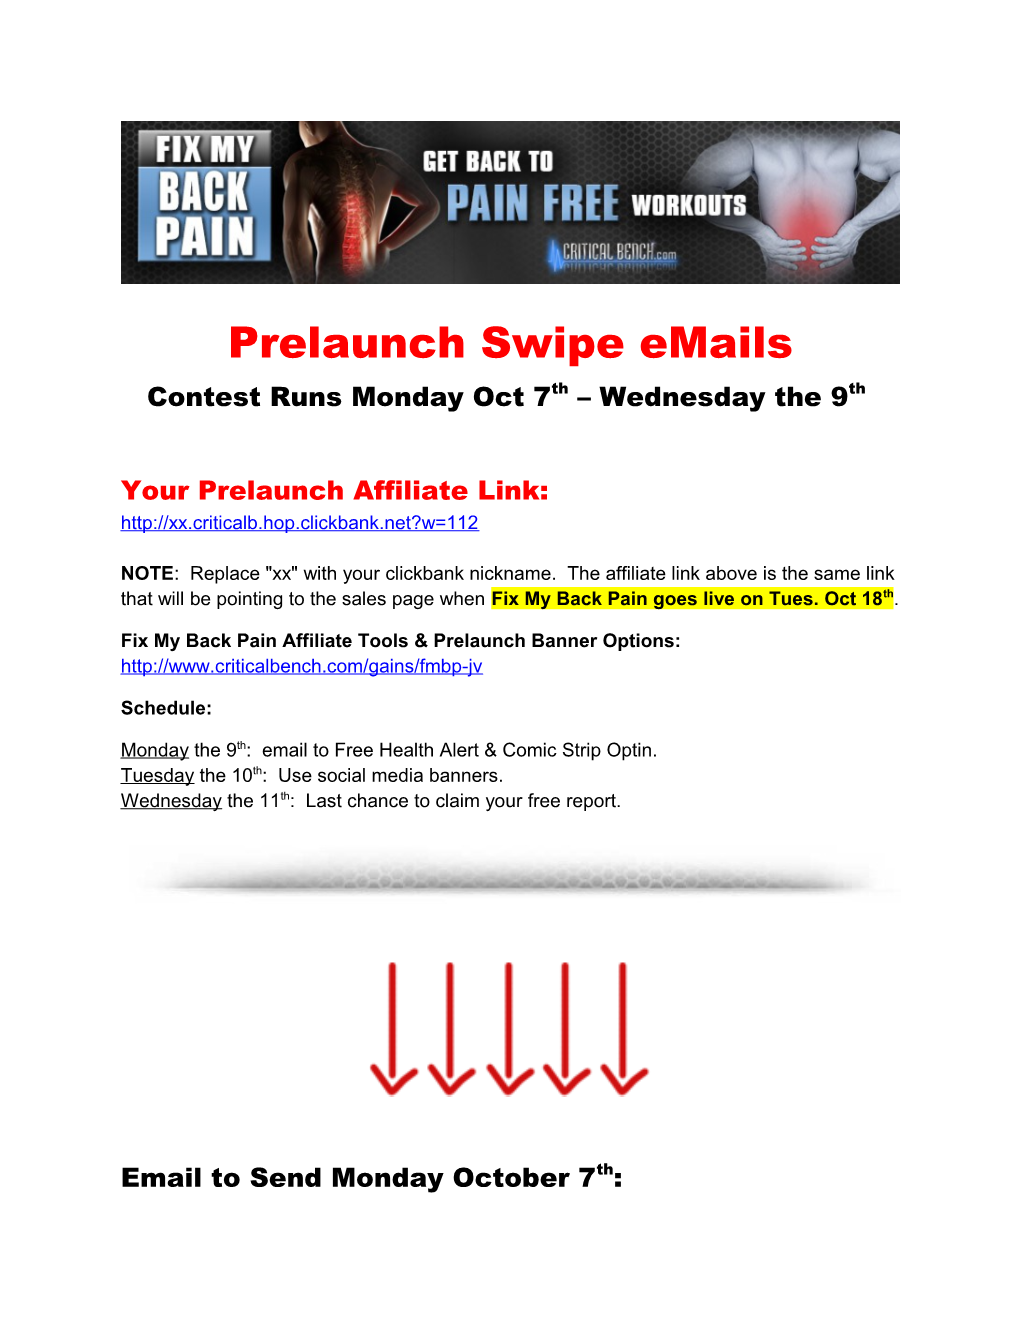 Prelaunch Swipe Emails Contest Runs Monday Oct 7Th Wednesday the 9Th